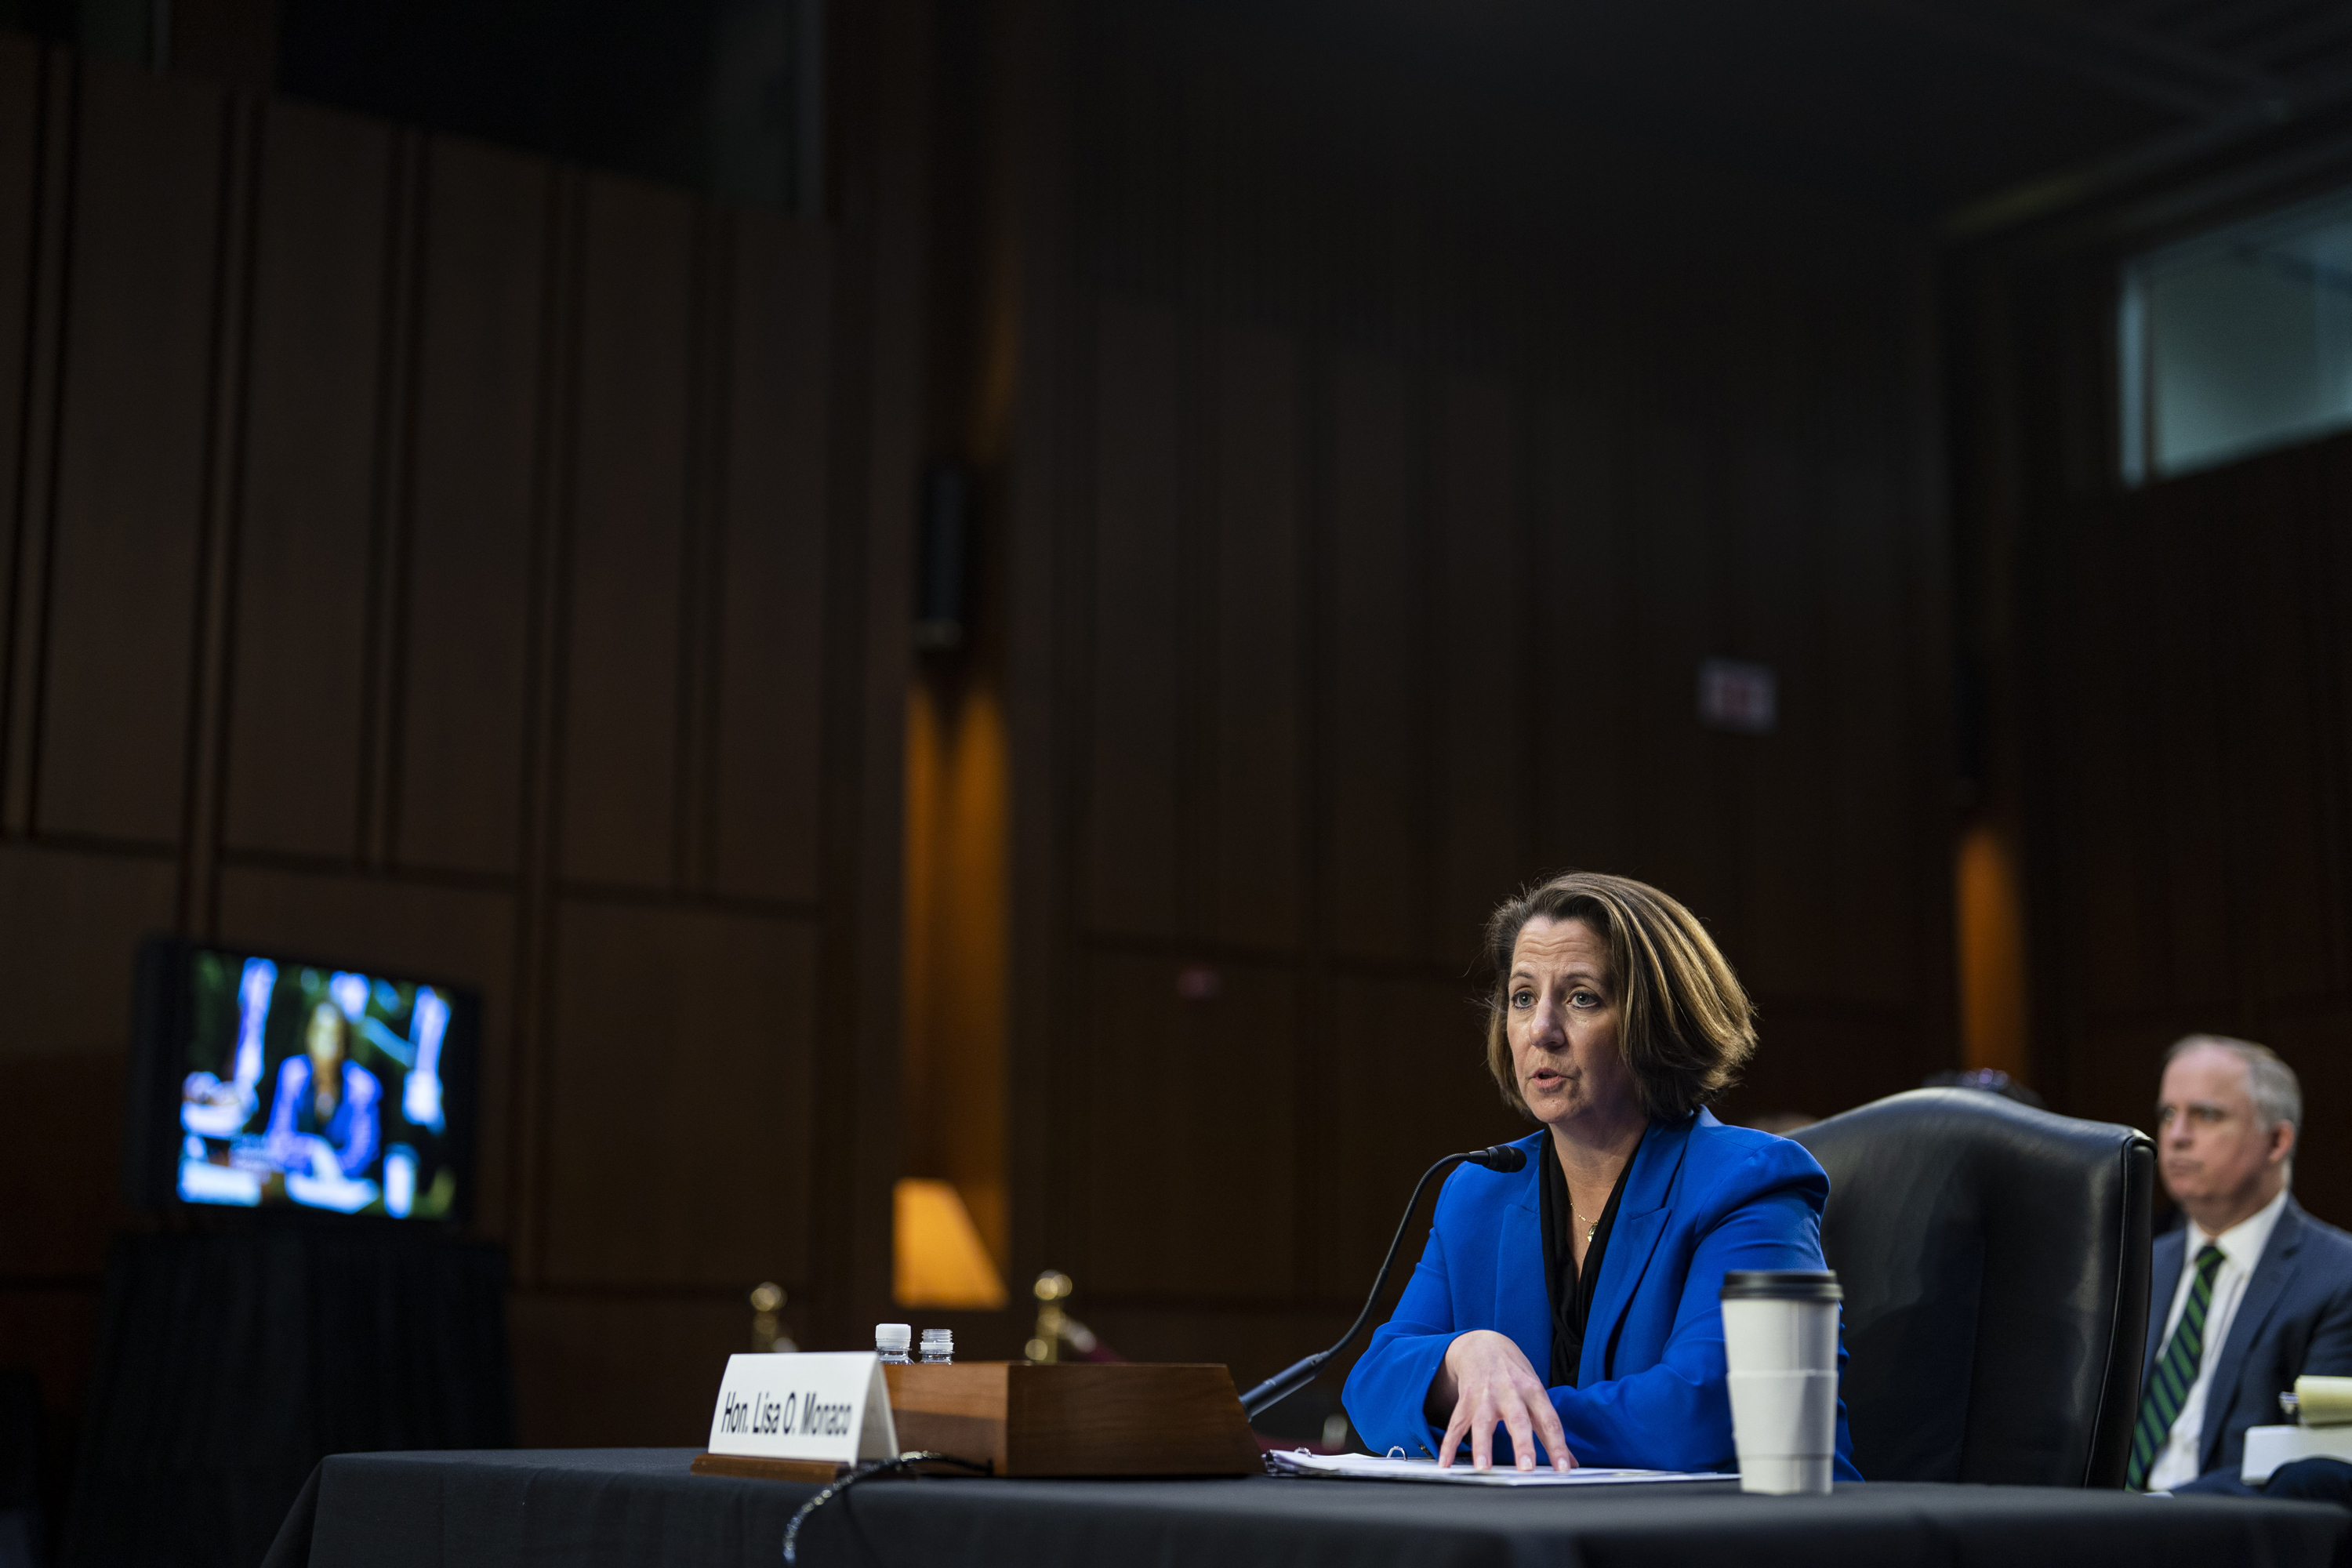 US Deputy Attorney General Lisa Monaco speaks during a Senate Judiciary Committee hearing in Washington, DC on Wednesday.